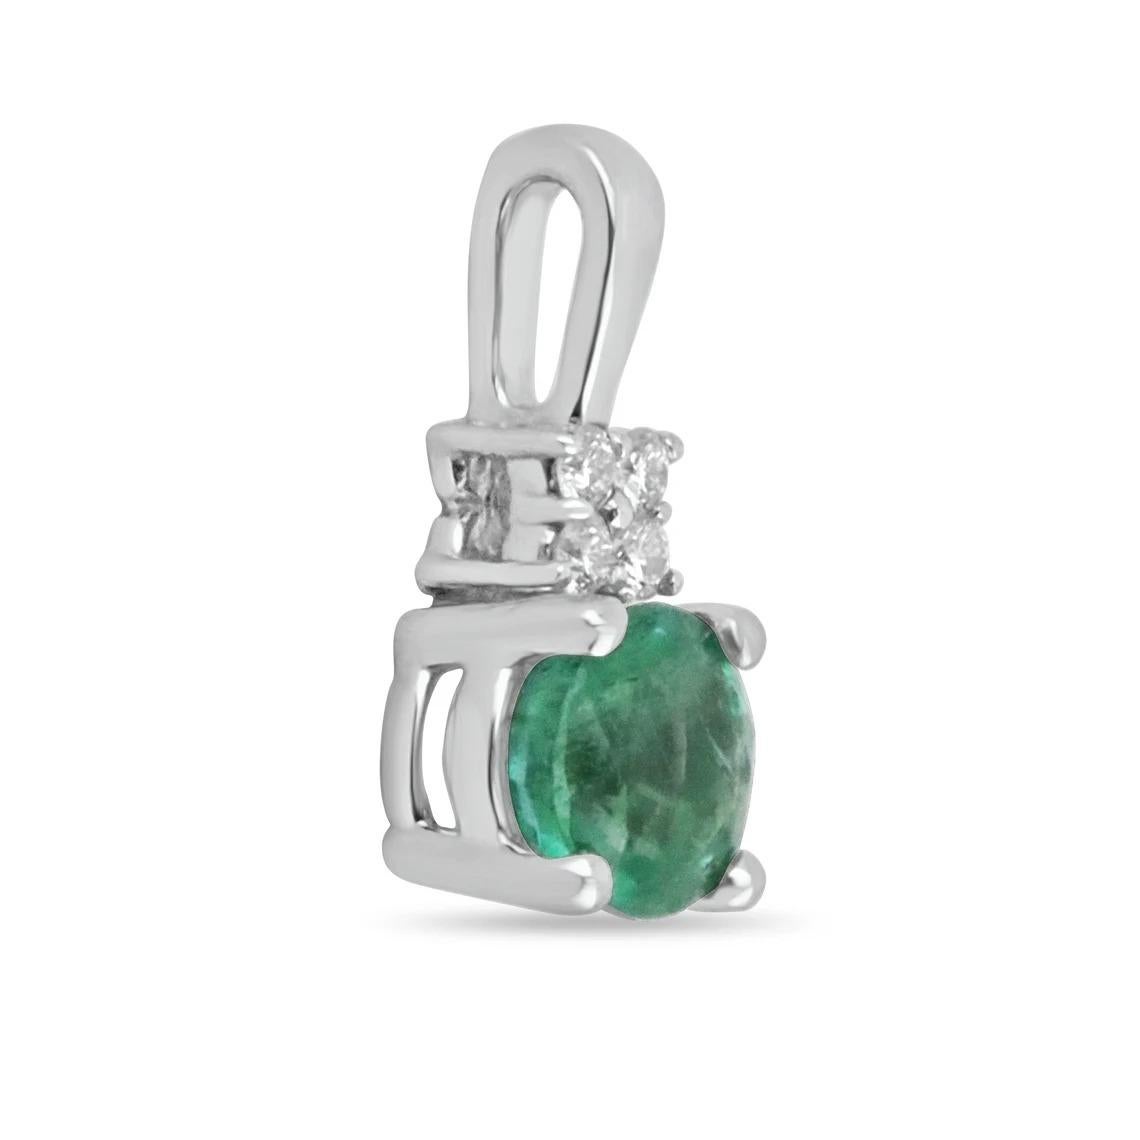 Featured here is a stunning, round natural emerald & diamond necklace in fine 14K white gold. Displayed is a medium-green emerald with very good transparency, accented by a simple four-prong mount allowing for the emerald to be shown in full view.